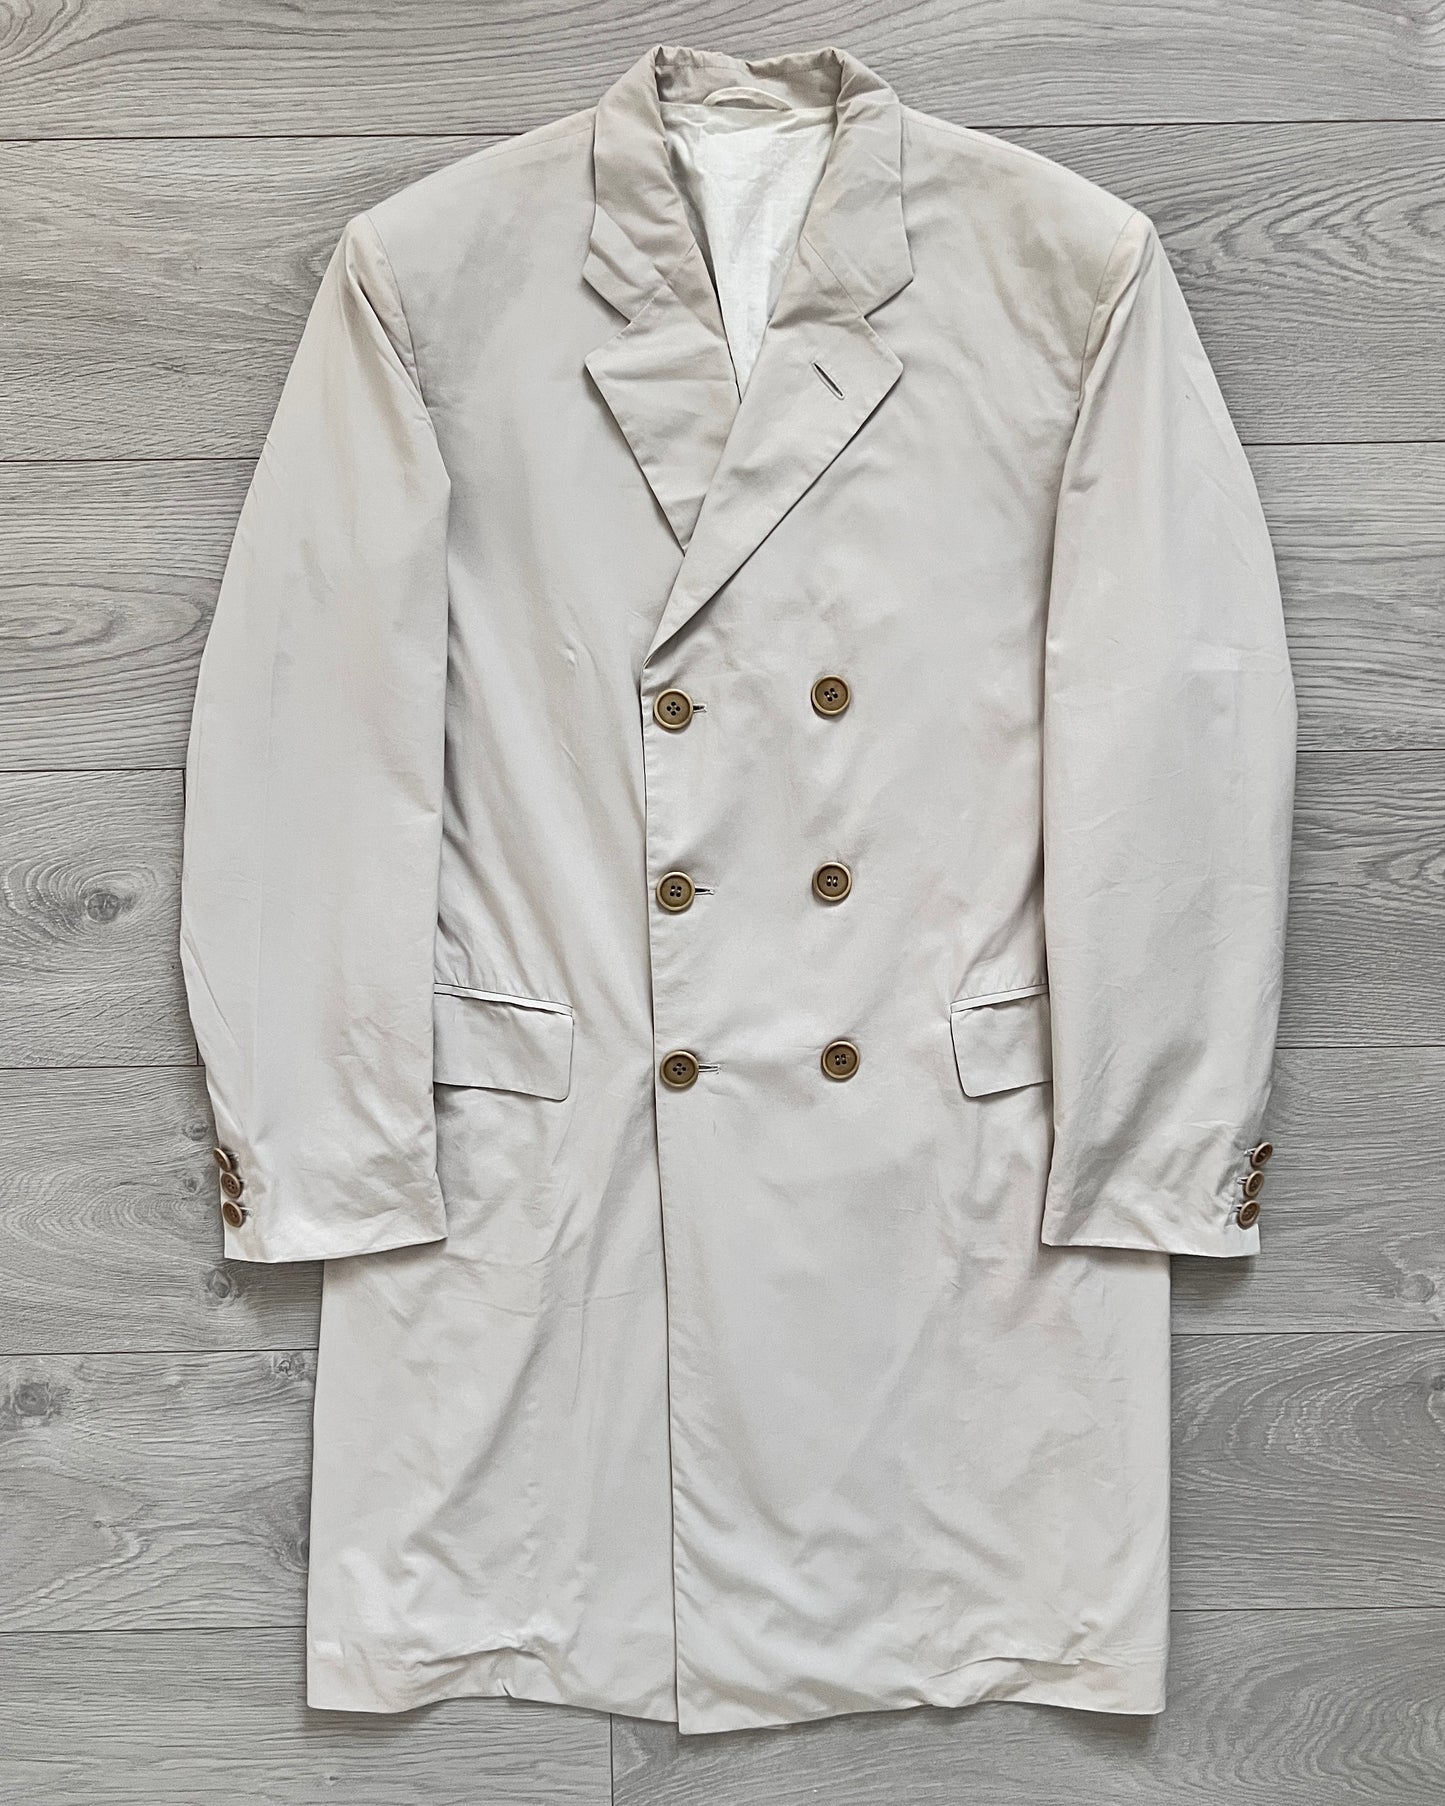 Helmut Lang 1990s Double Breasted Military Coat - Size M